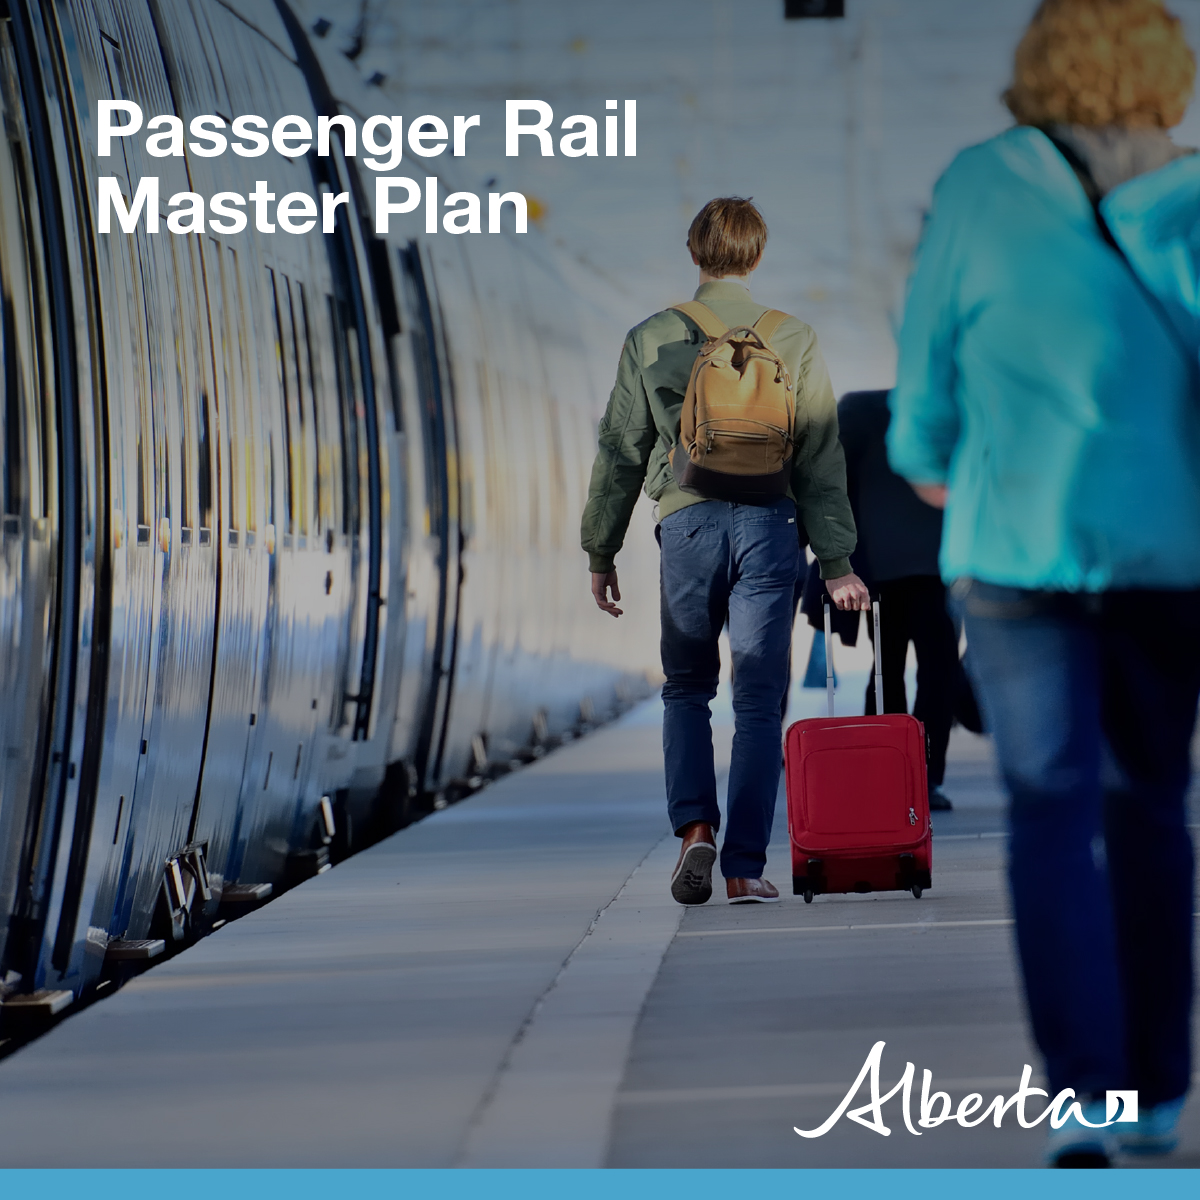 The Passenger Rail Master Plan will lay the track for the optimal passenger rail system for Alberta. The plan will look forward decades and identify concrete actions we can take now, and in the future, to build a system to support our growing population. alberta.ca/release.cfm?xI…